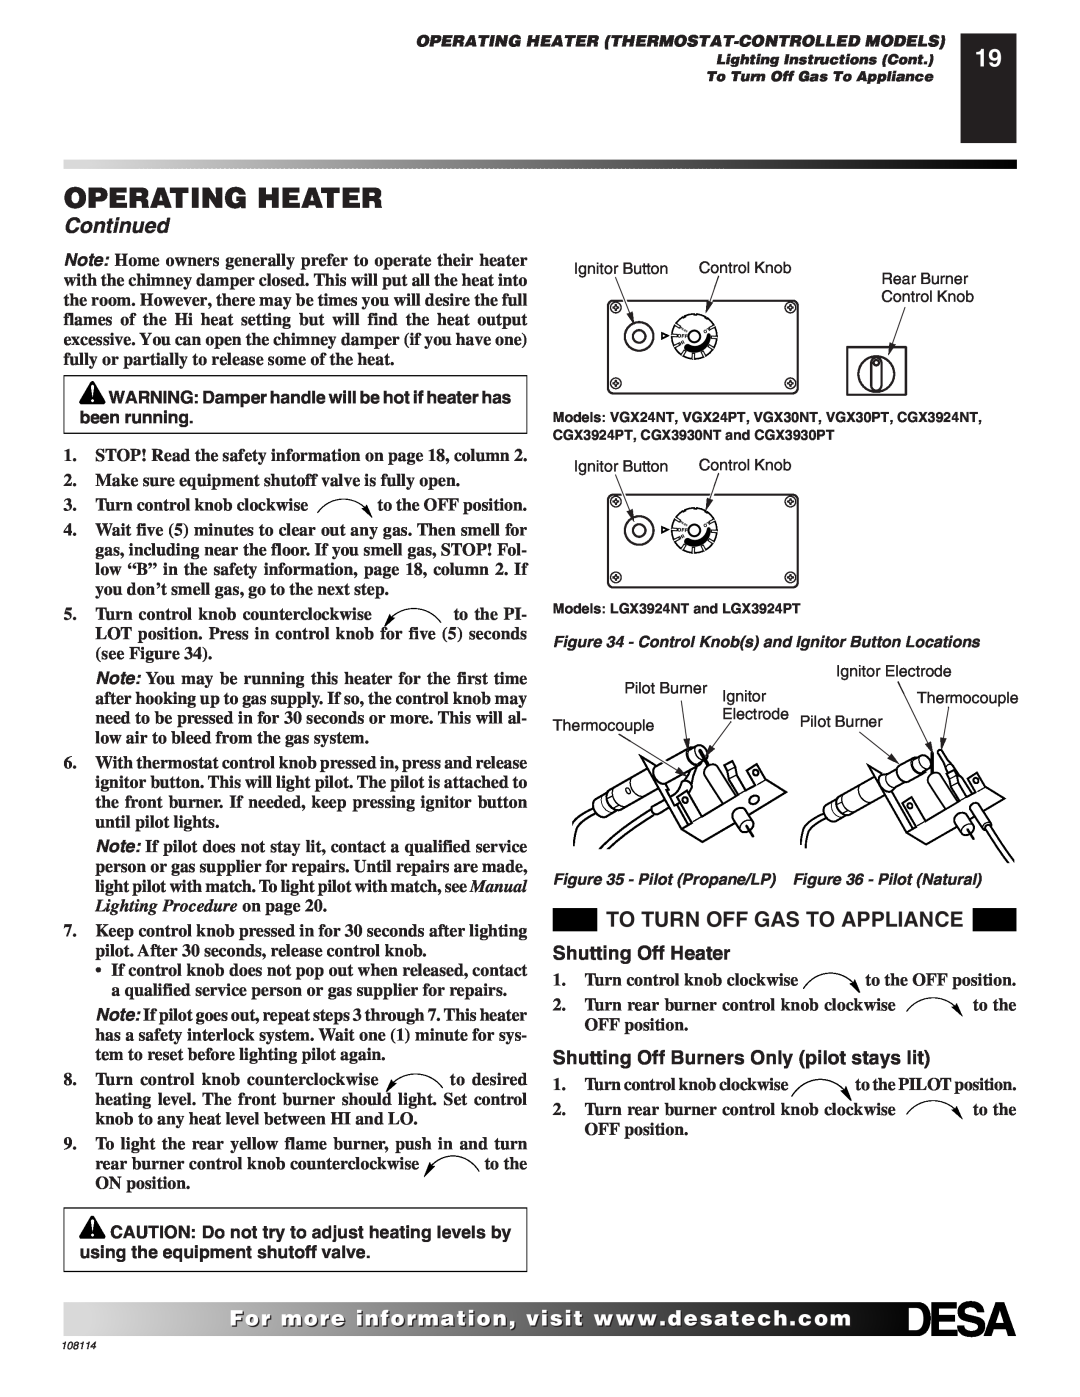 Desa INTERNATIONAL UNVENTED (VENT-FREE) GAS LOG HEATER installation manual Operating Heater, Continued, Shutting Off Heater 